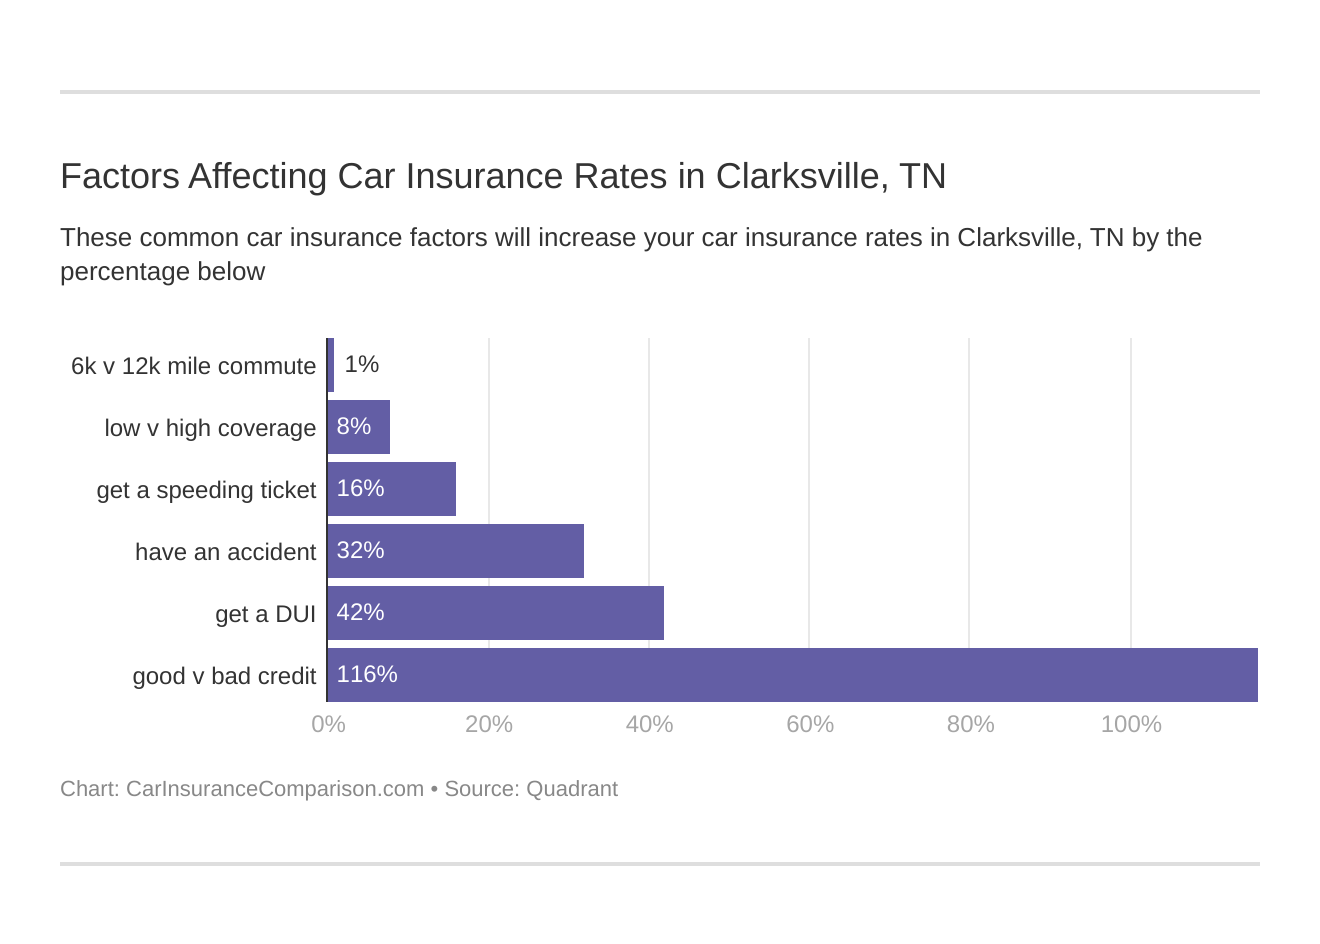 Factors Affecting Car Insurance Rates in Clarksville, TN